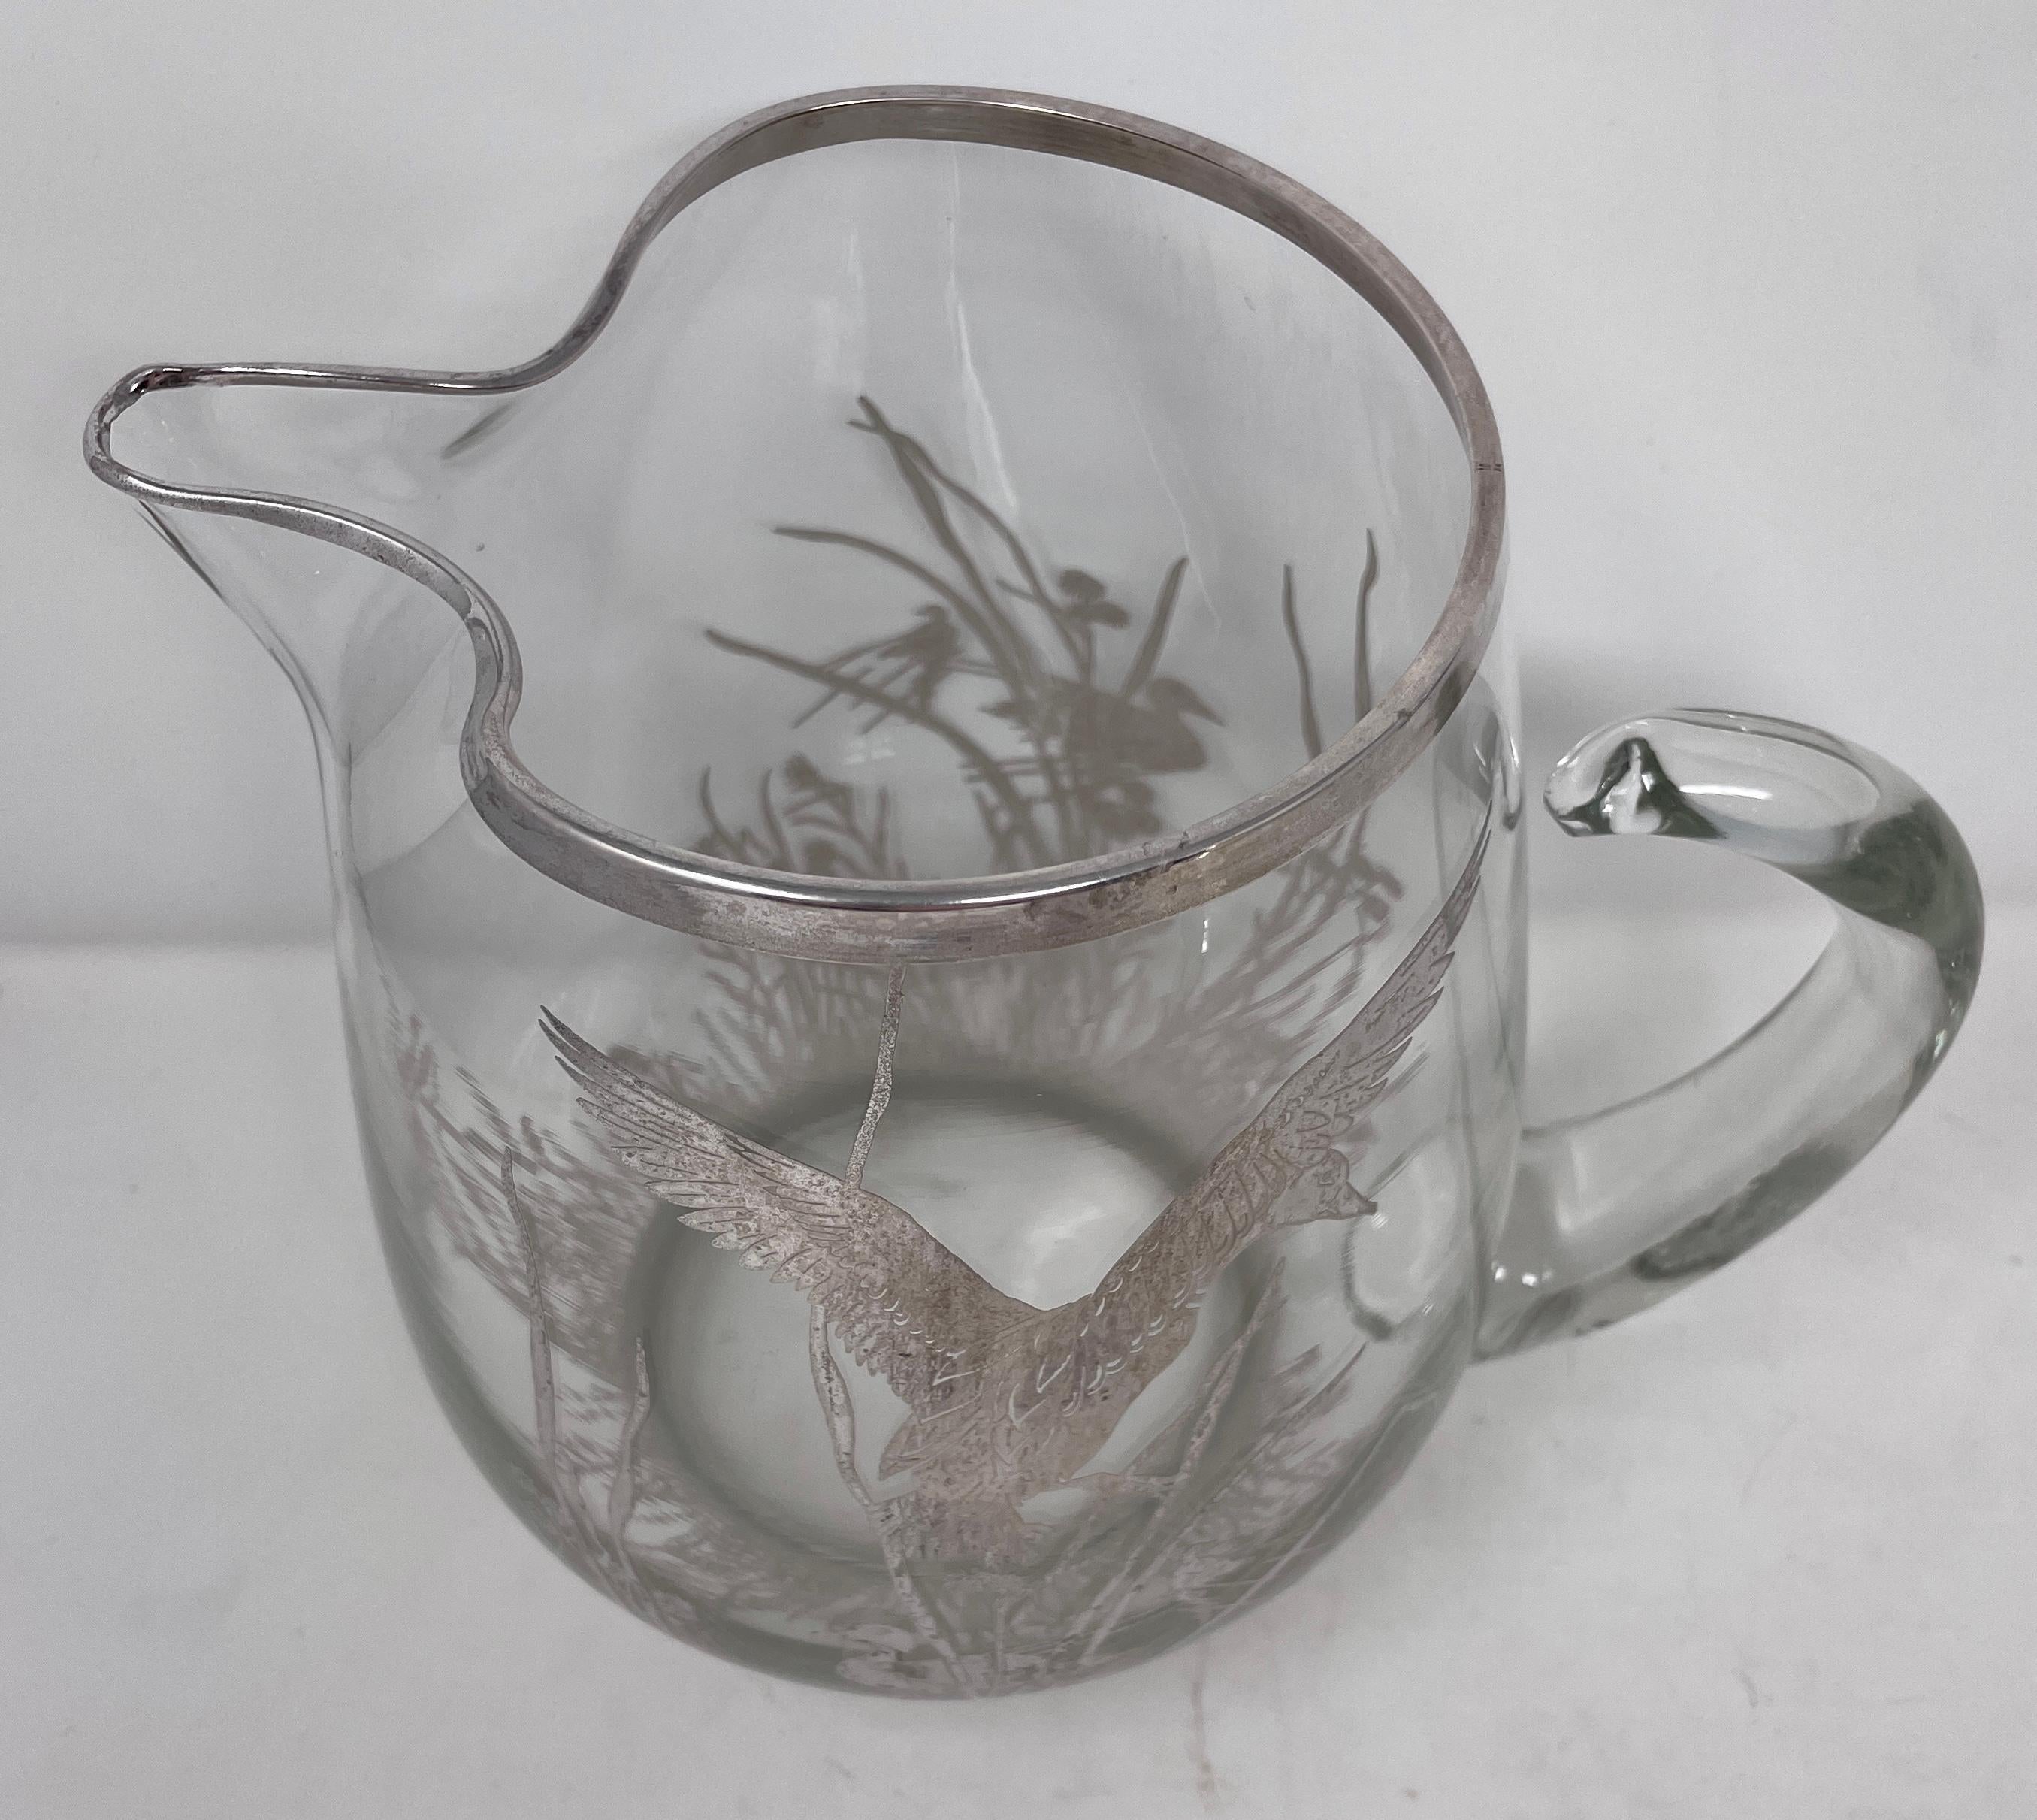 20th Century Estate Art Deco Silvered Cut Crystal Cocktail Pitcher with Birds, circa 1930s